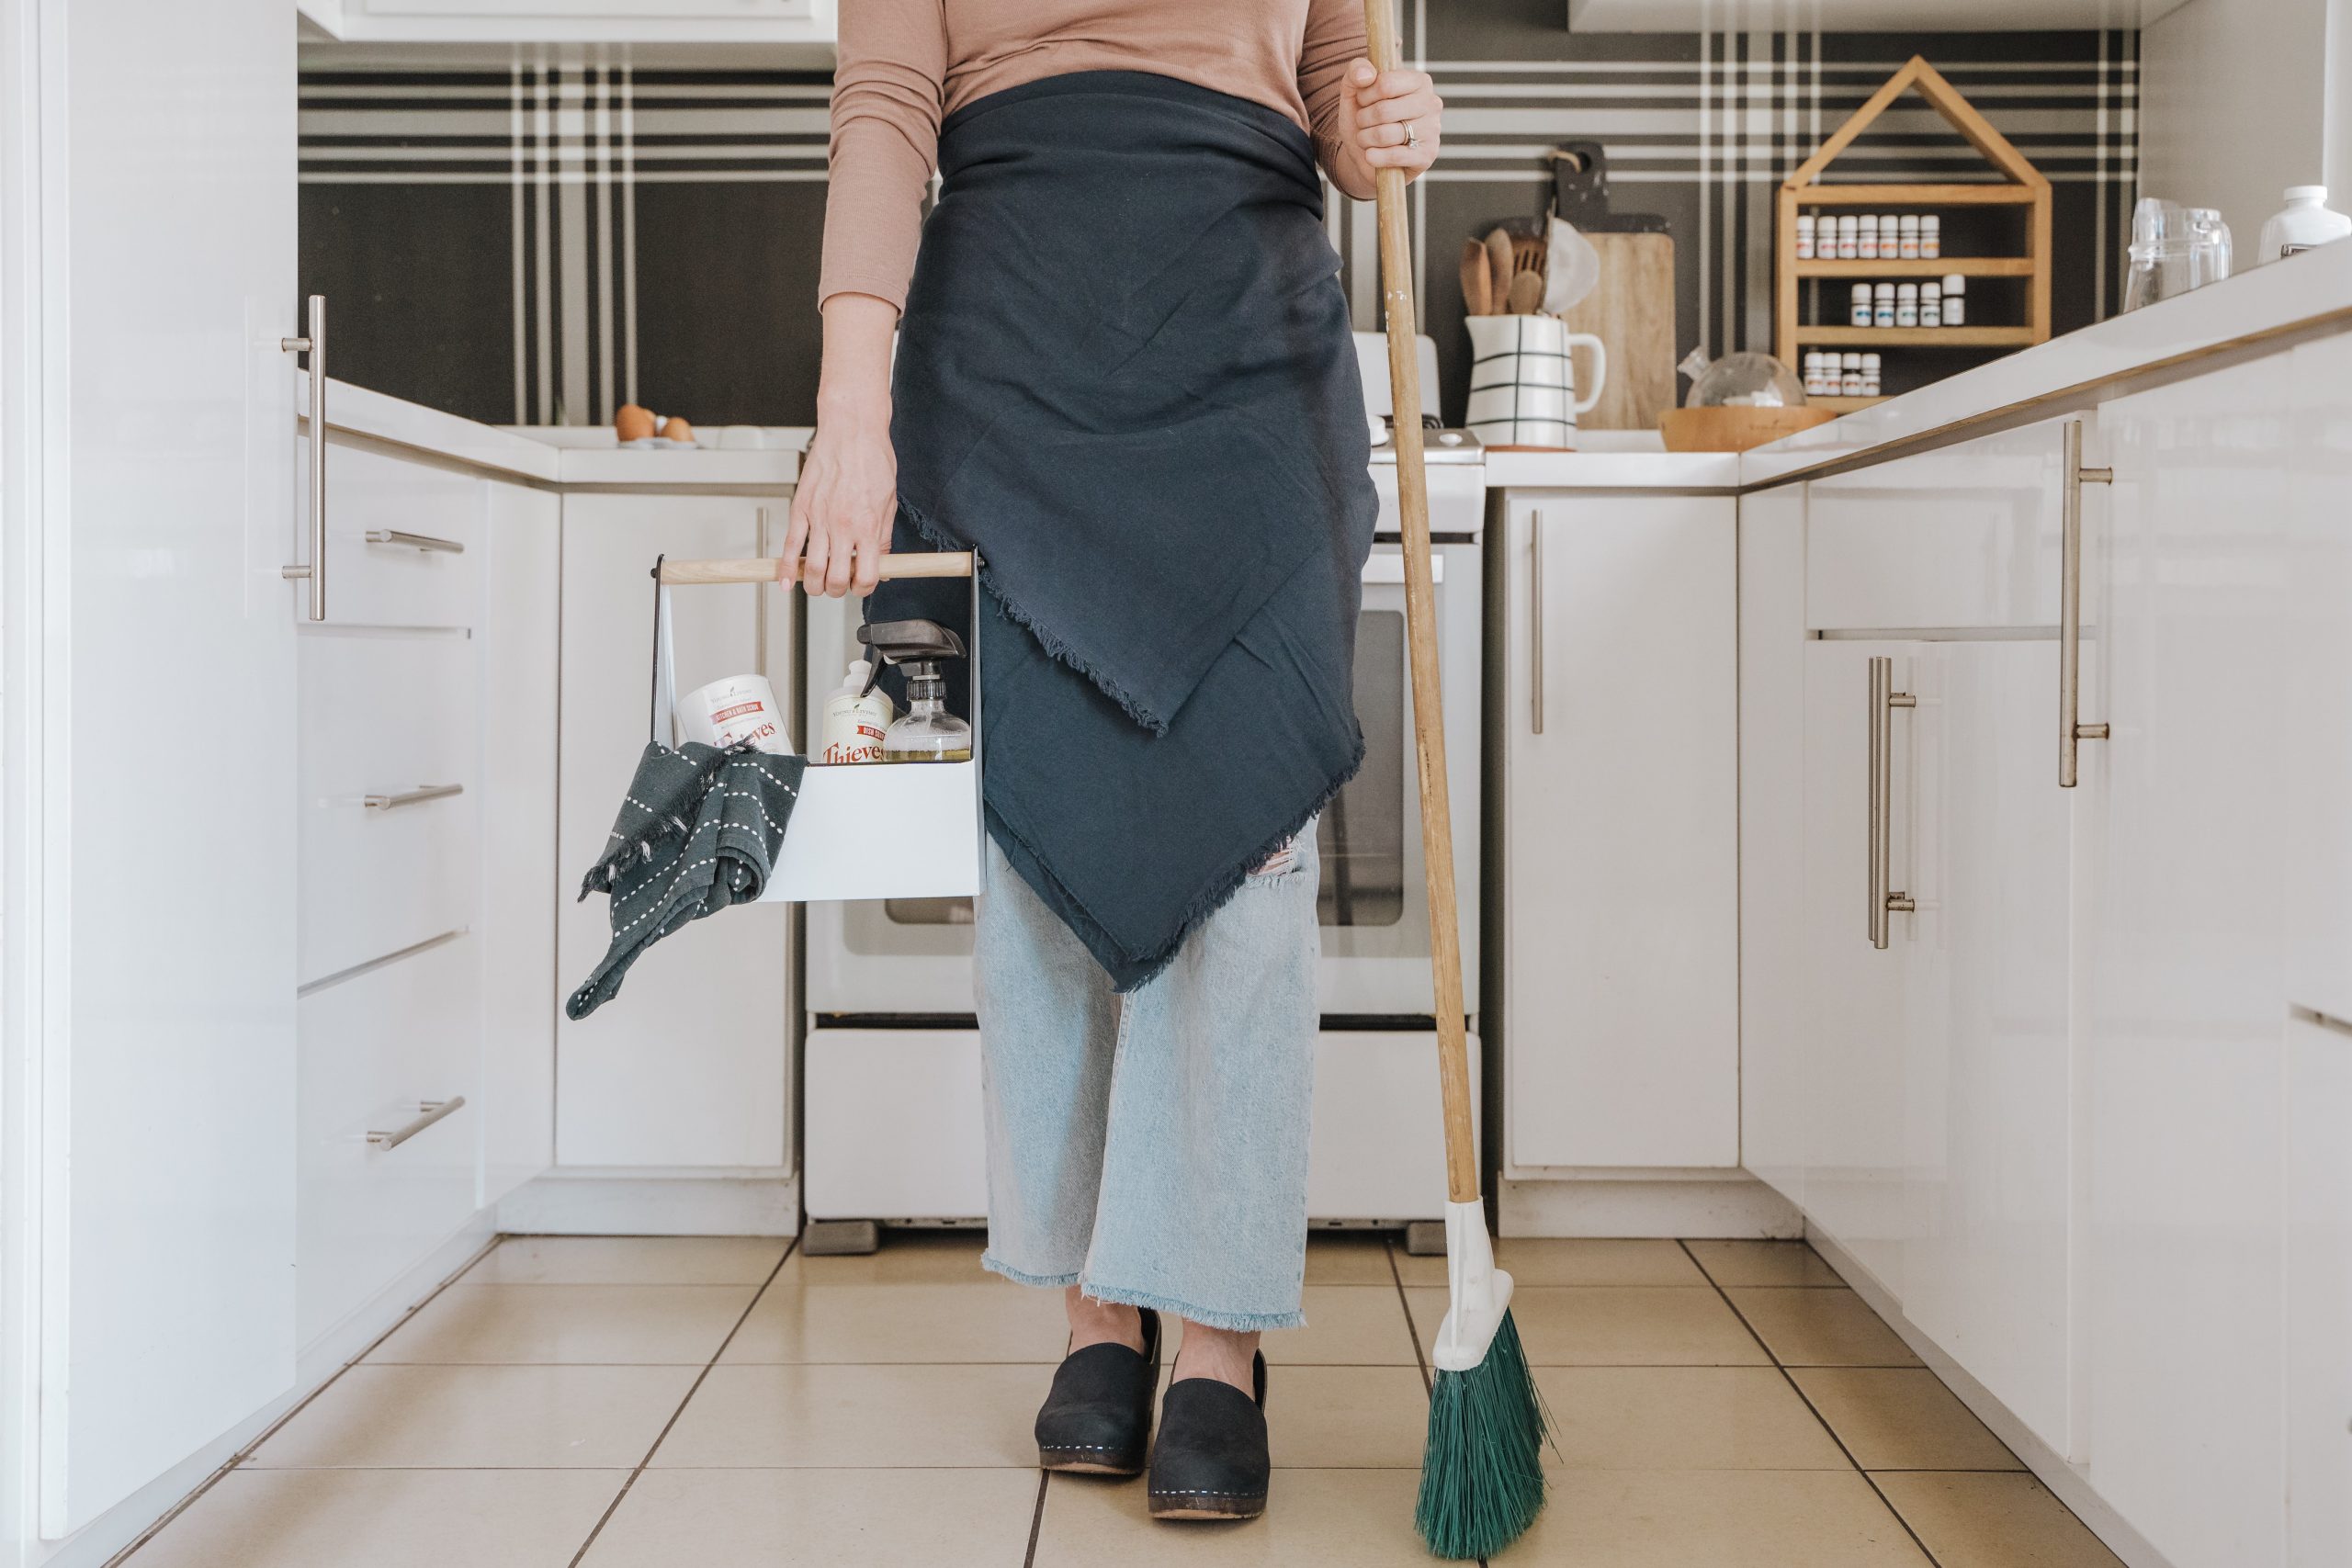 Woman standing in a kitchen holding cleaning supplies